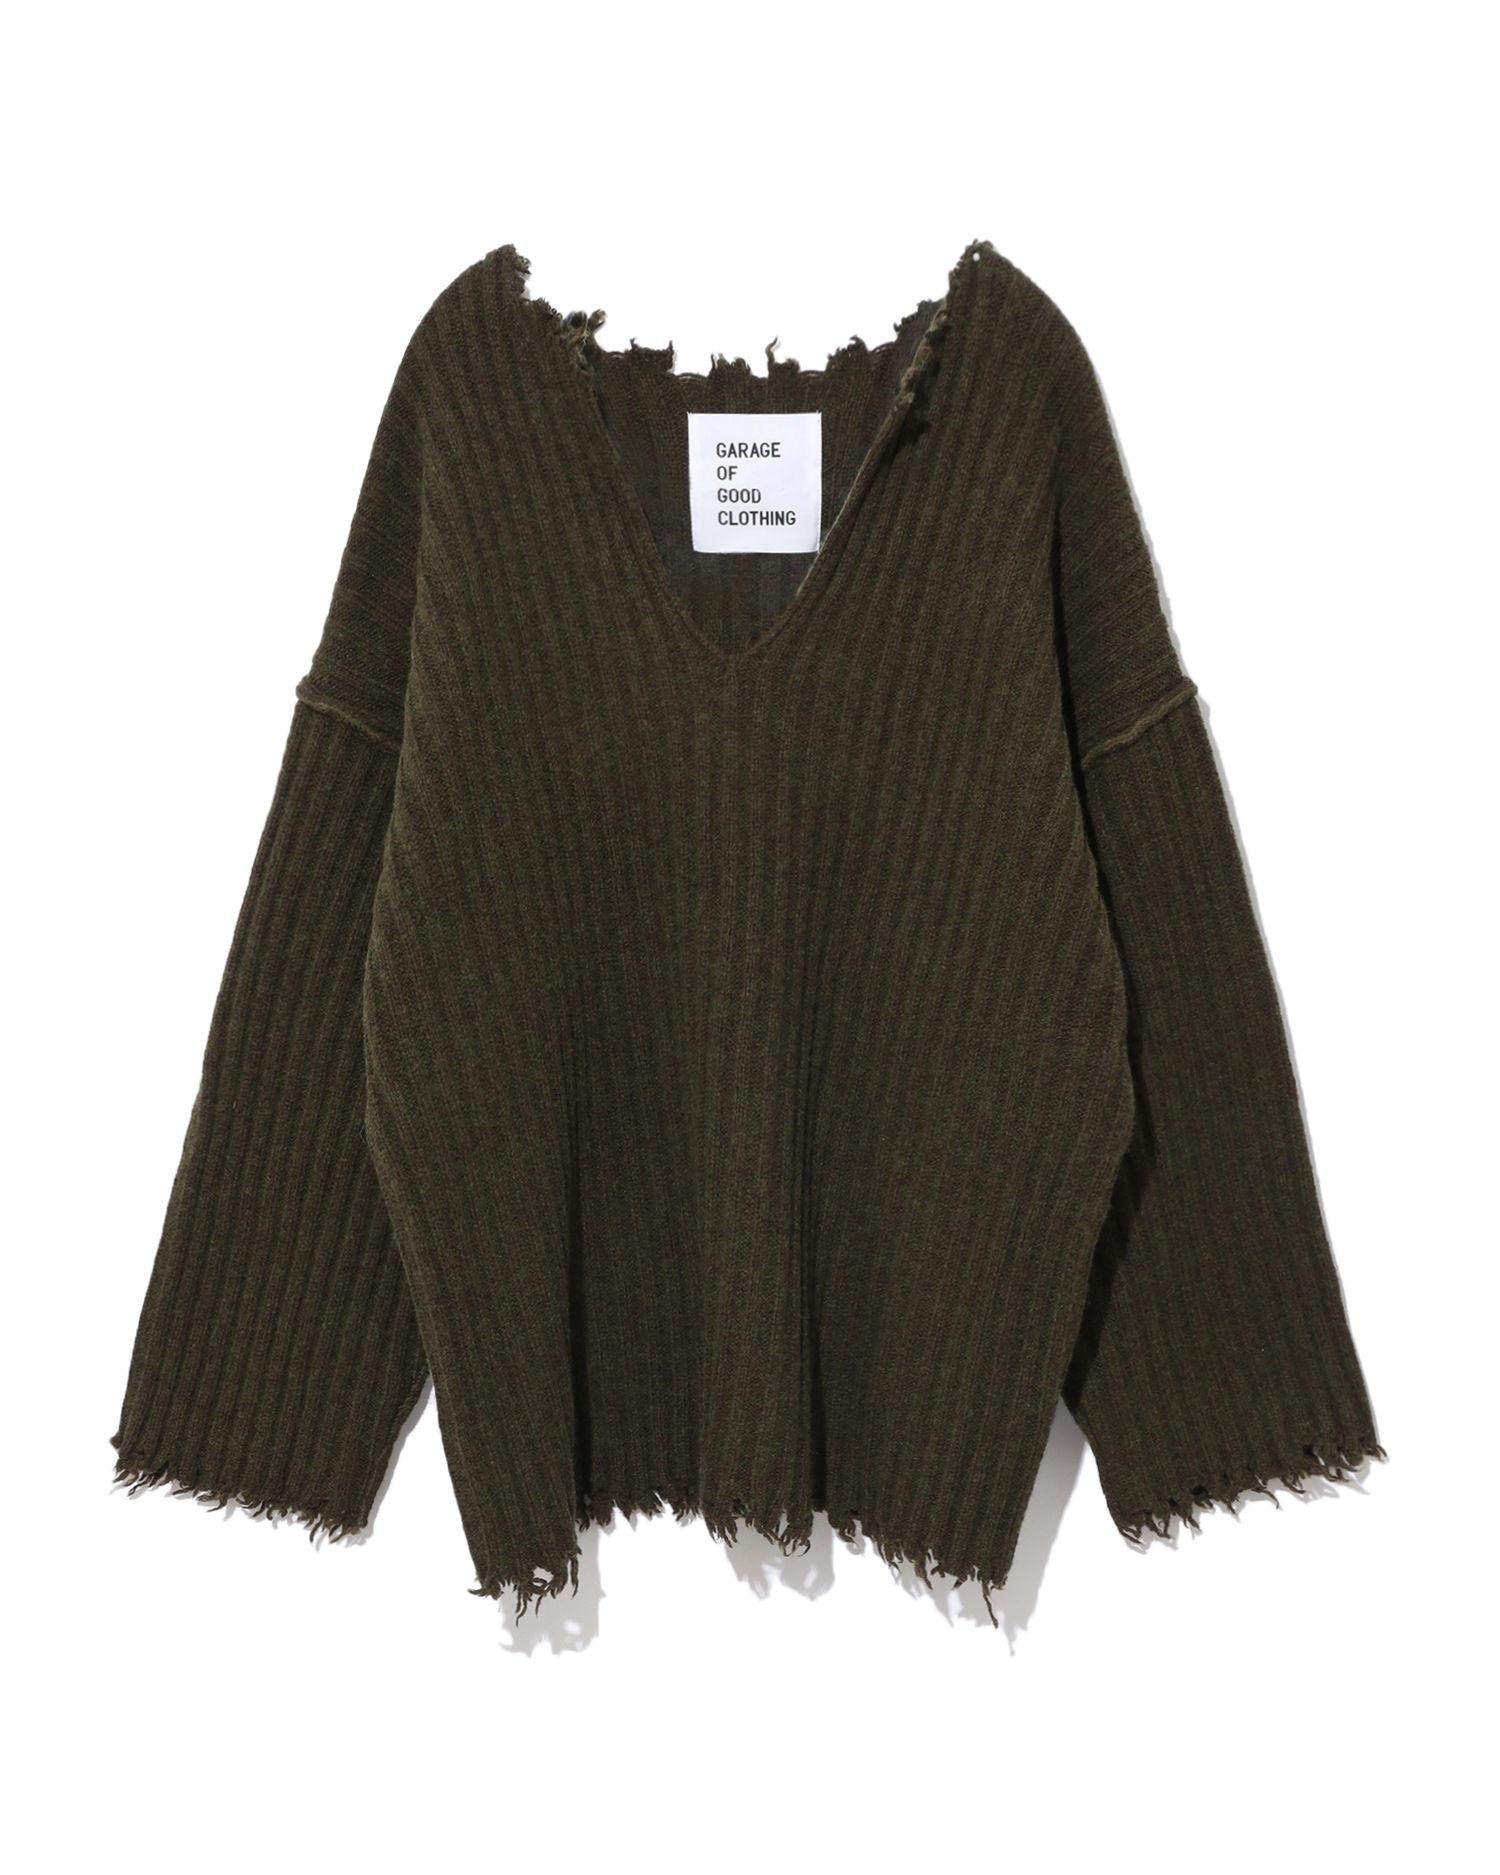 Distressed ribbed sweater by GARAGE OF GOOD CLOTHING